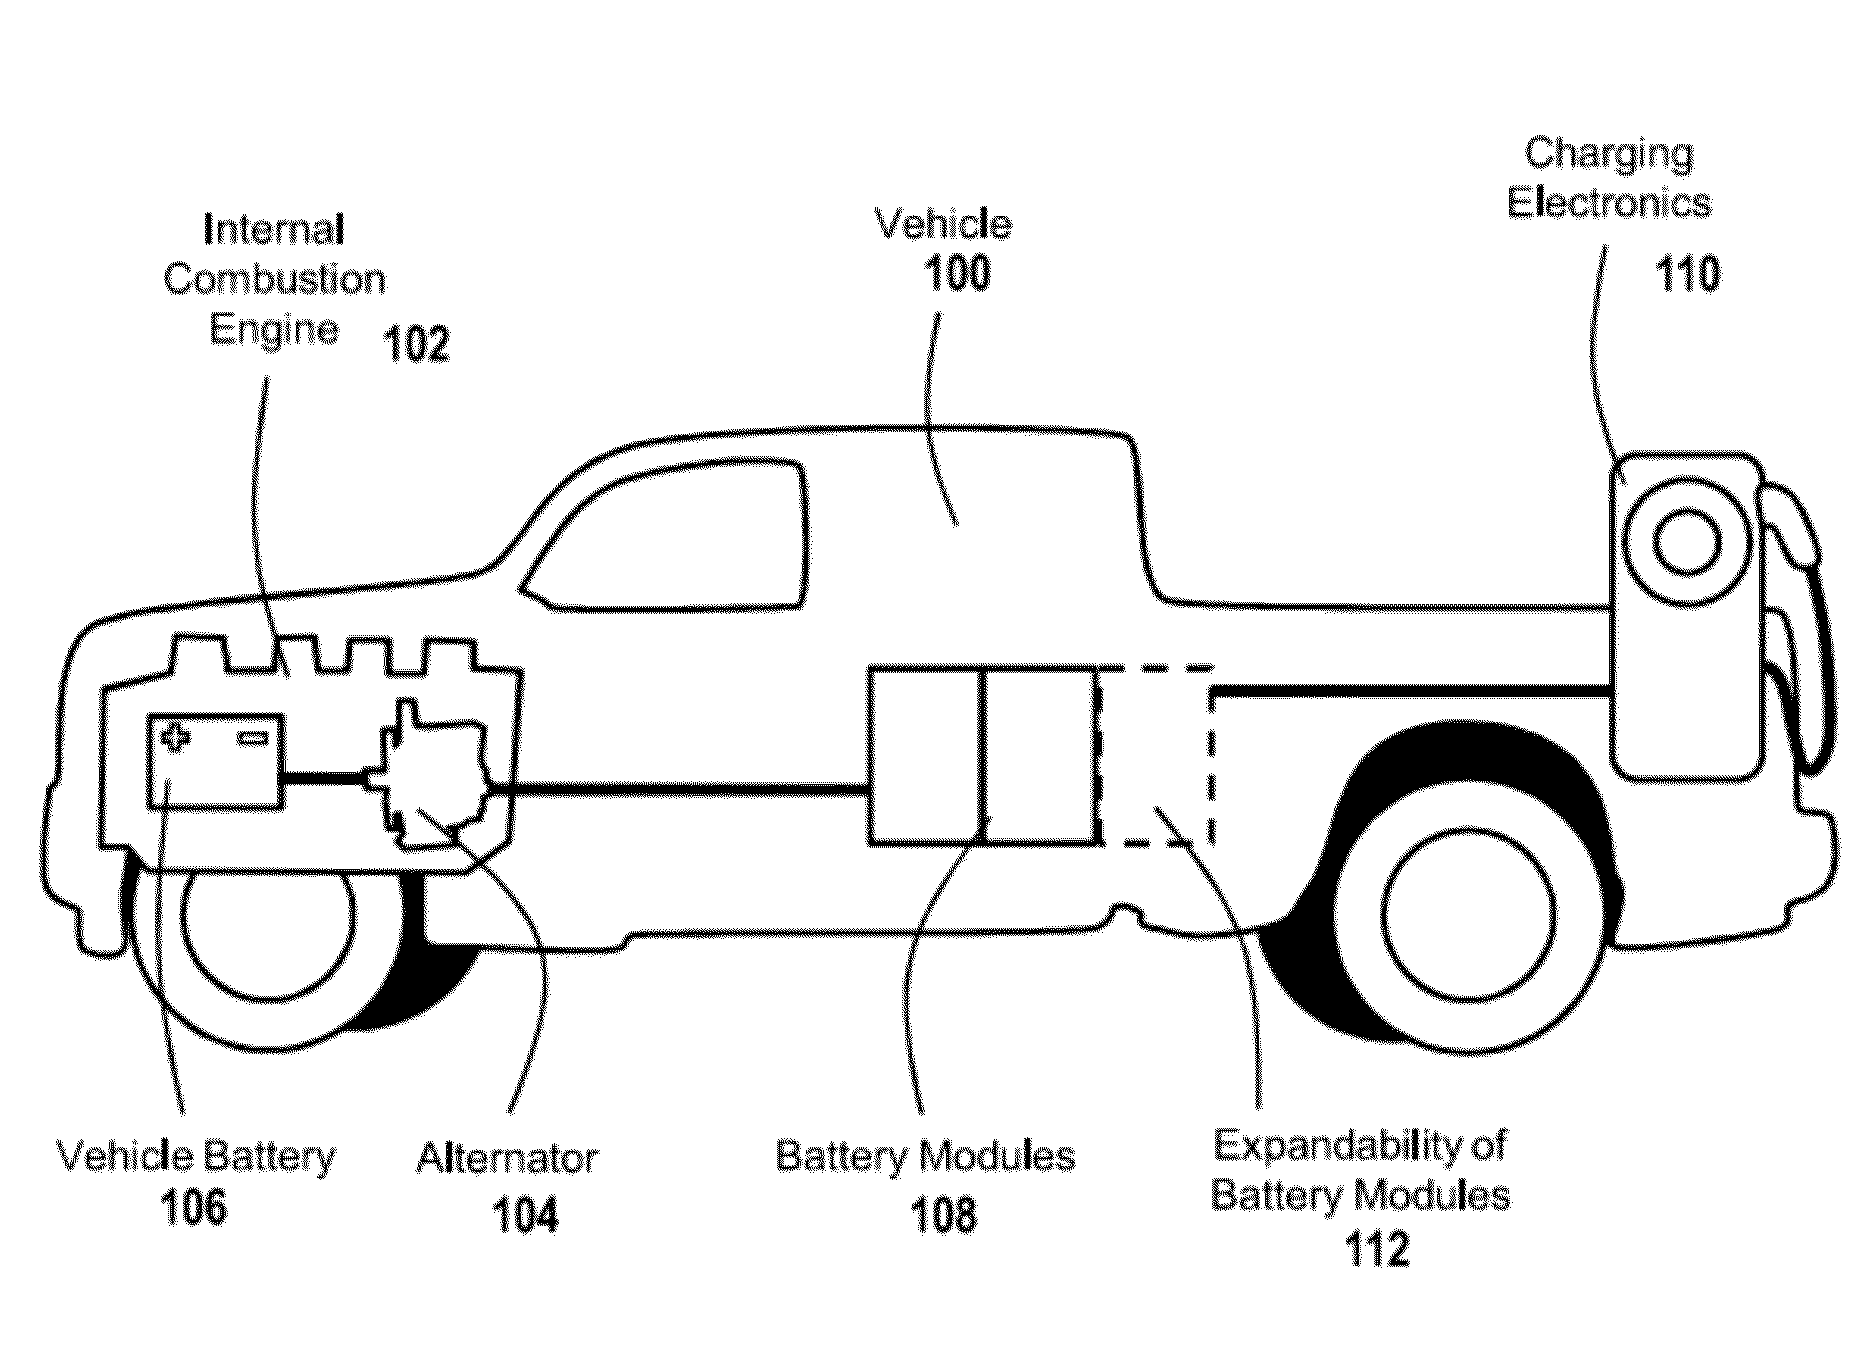 Charging Service Vehicles With Battery and Generator Sources